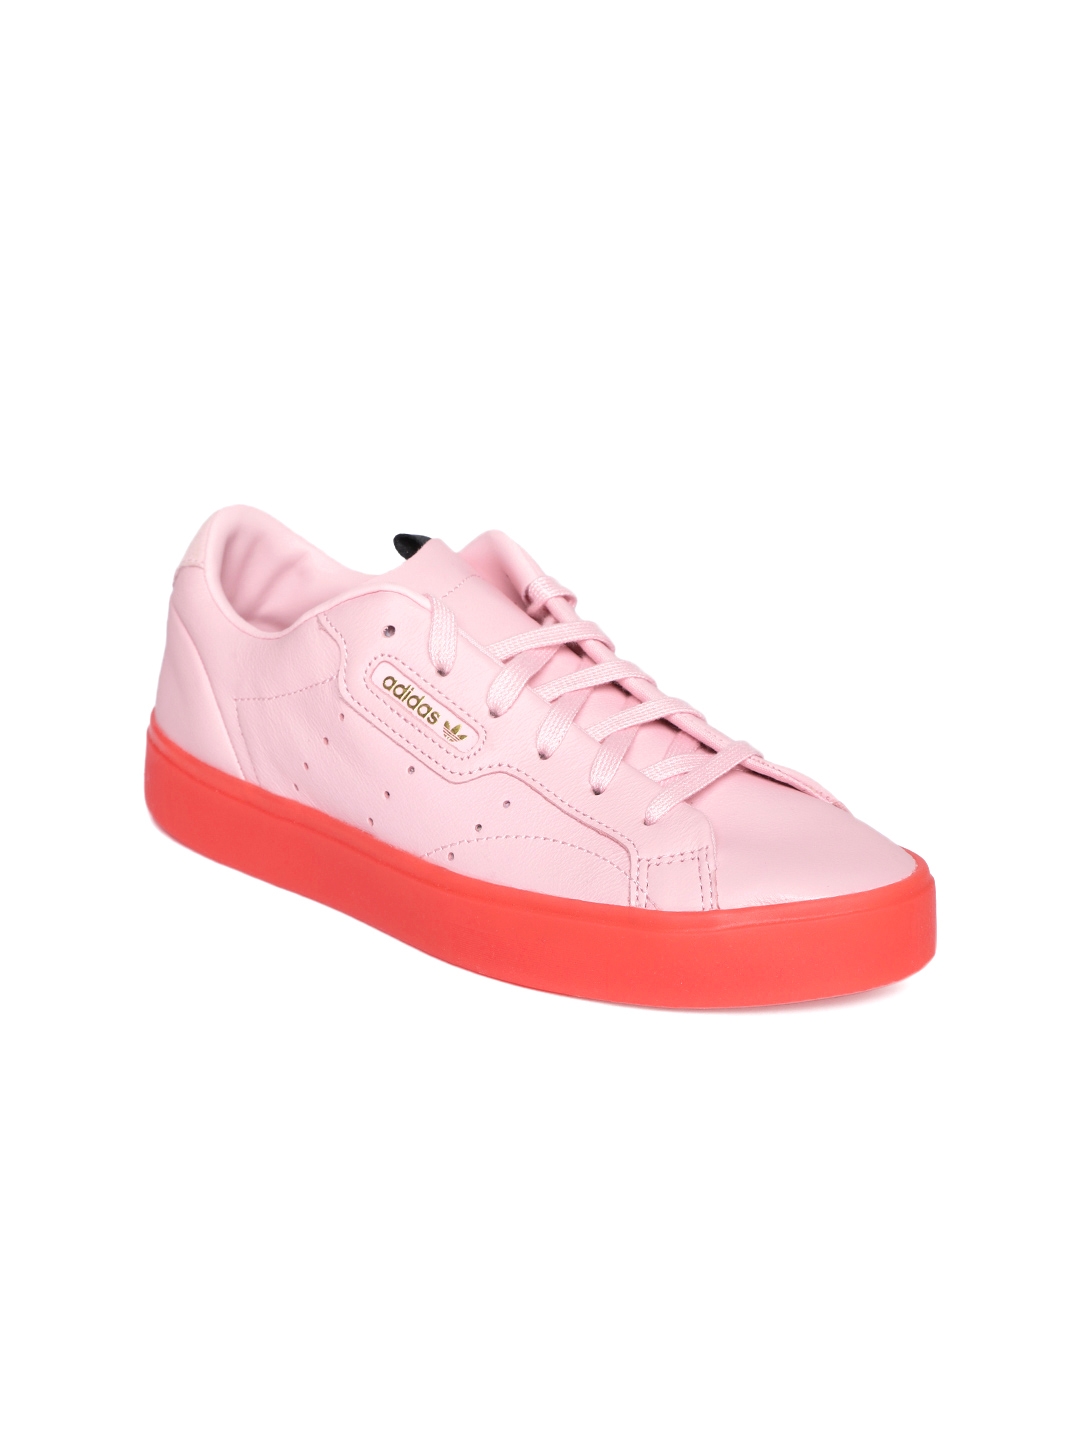 Buy ADIDAS Originals Women Pink Sleek Leather Sneakers - Casual Shoes for  Women 8616337 | Myntra